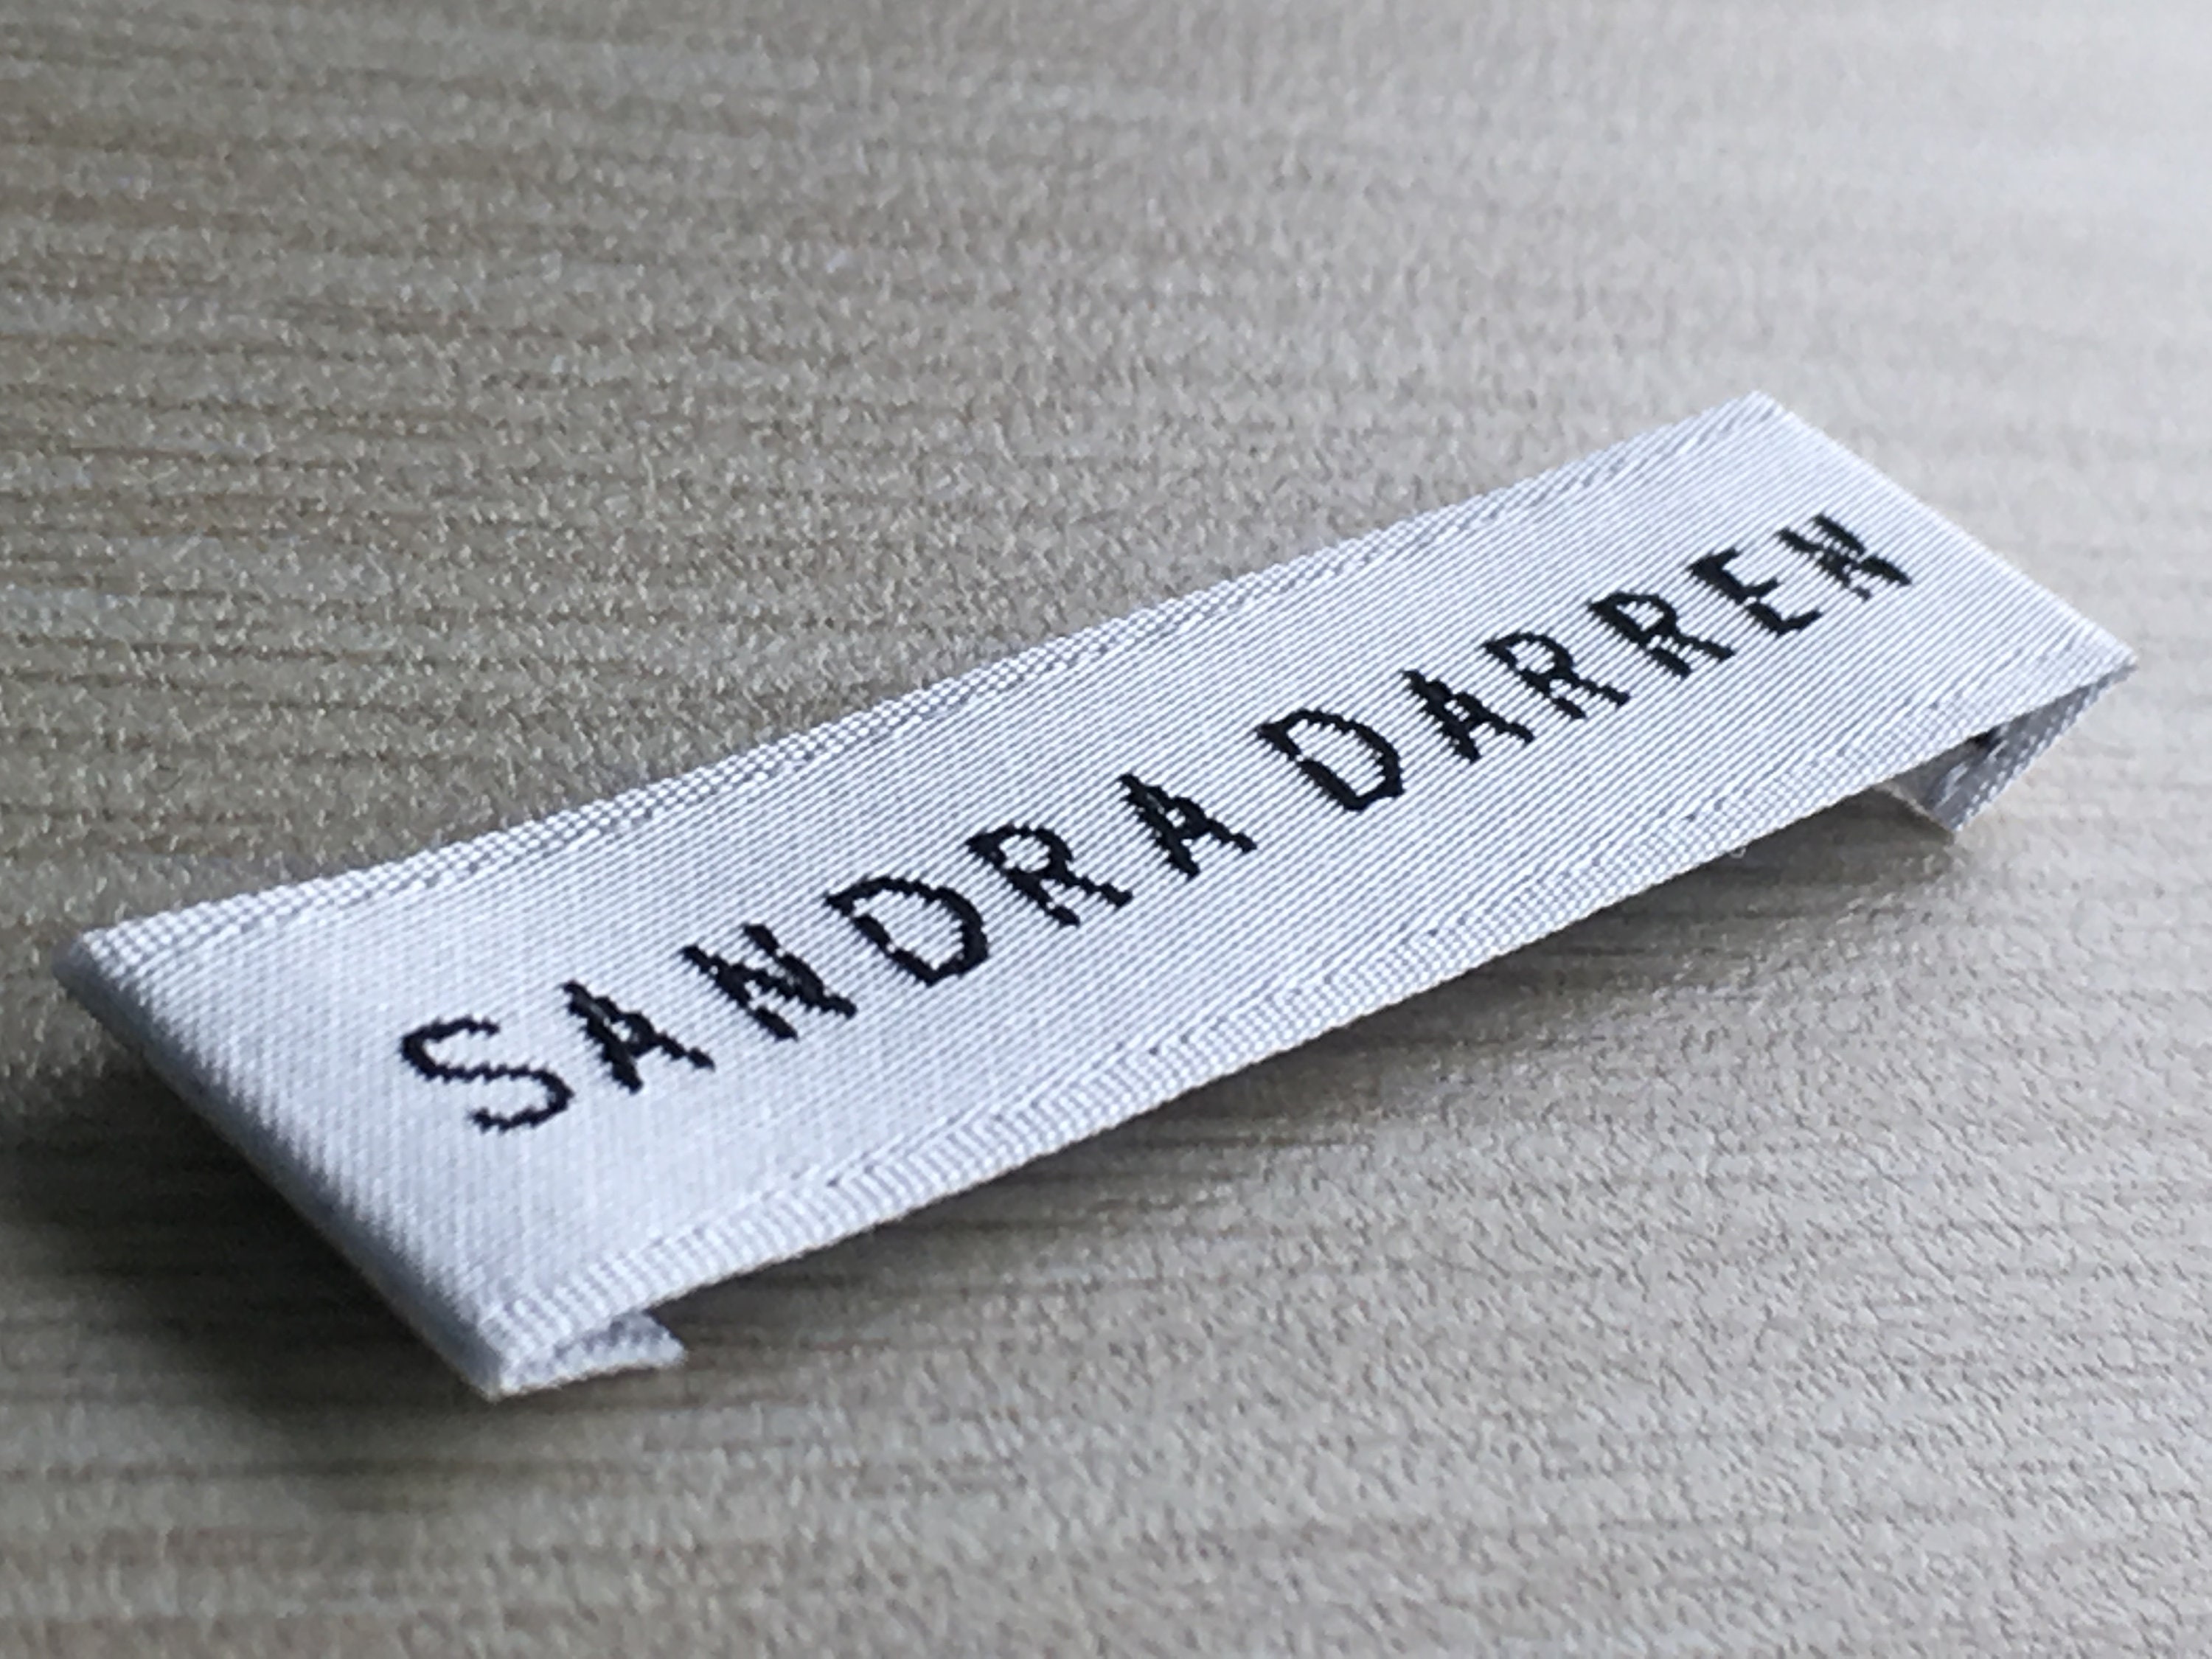 Woven Label, Clothing Label, Satin Woven, Vietnam Trim Supplier, Main Woven,  Size Woven, Luxury Label -  Canada